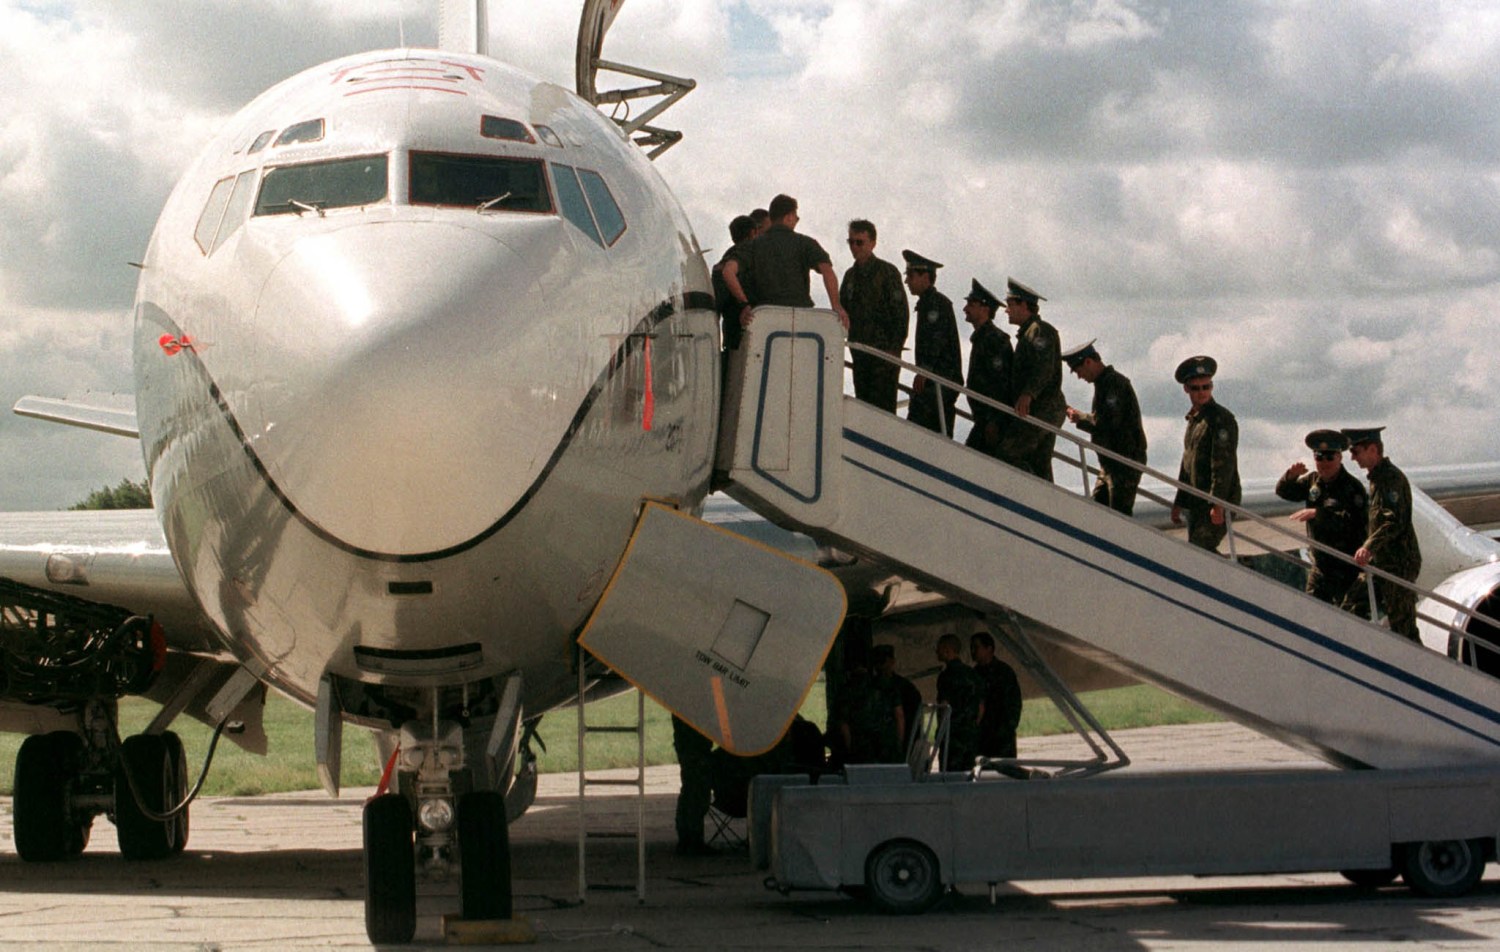 A group of Ukrainian officers enter the U.S. OC-135B observation aircraft at a military base near Kiev June 23. The U.S. military mission arrived in Ukraine for a two-day series of overflights using both American and Ukrainian observation aircrafts according to "The Open Skies Treaty " signed in 1992 between member states of NATO and the former Warsaw Pact.YK/FMS